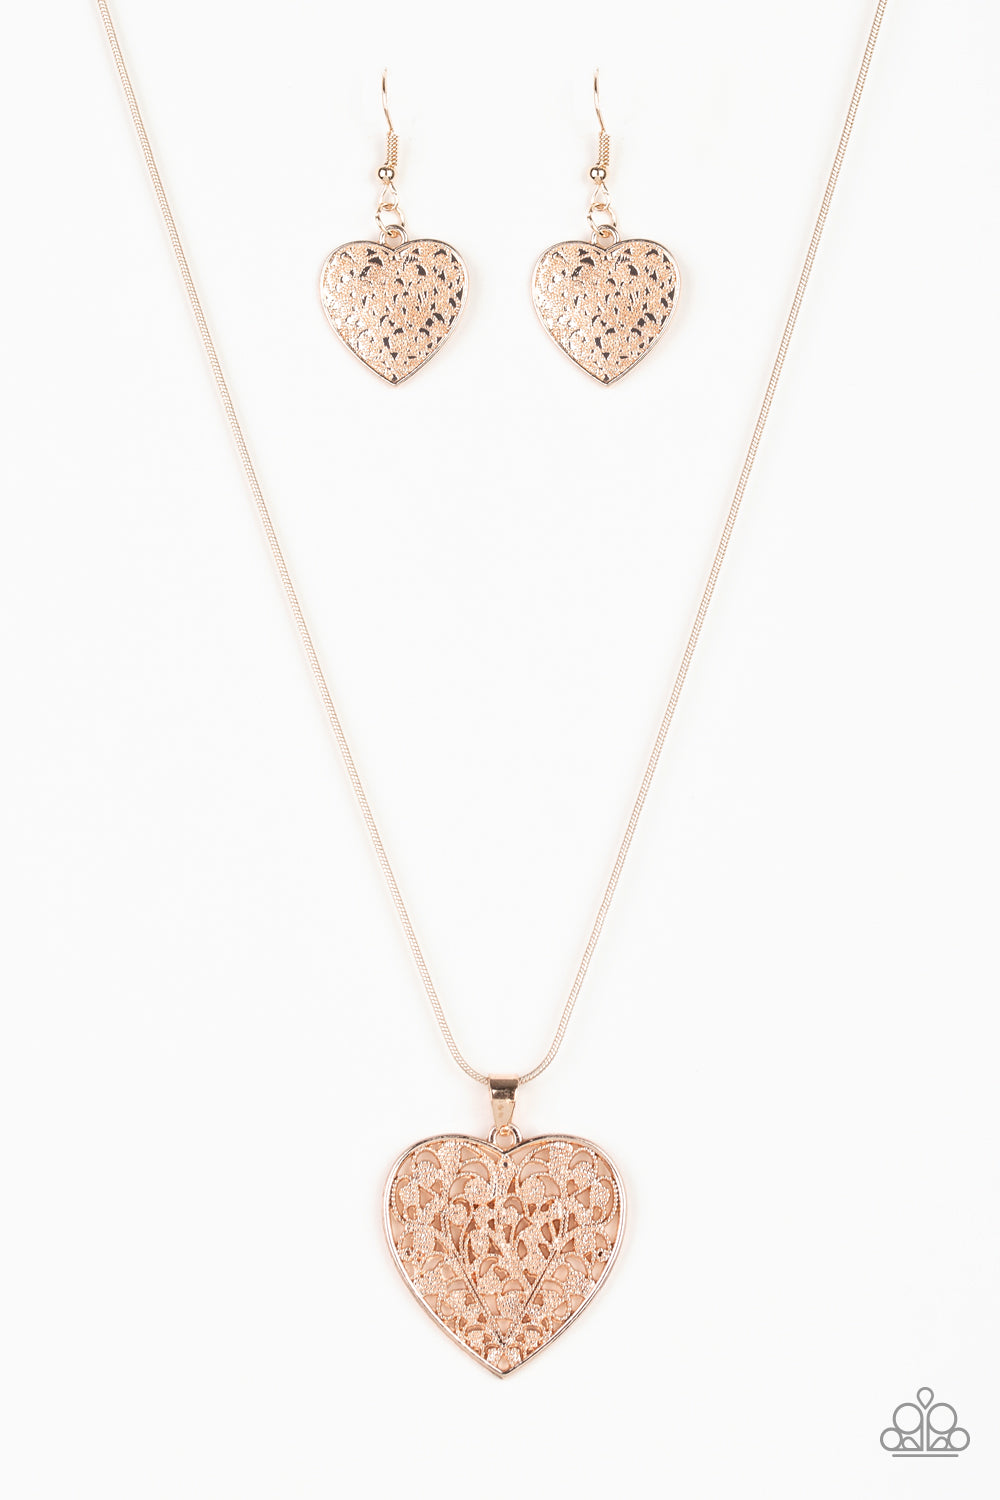 LOOK INTO YOUR HEART - ROSE GOLD NECKLACE